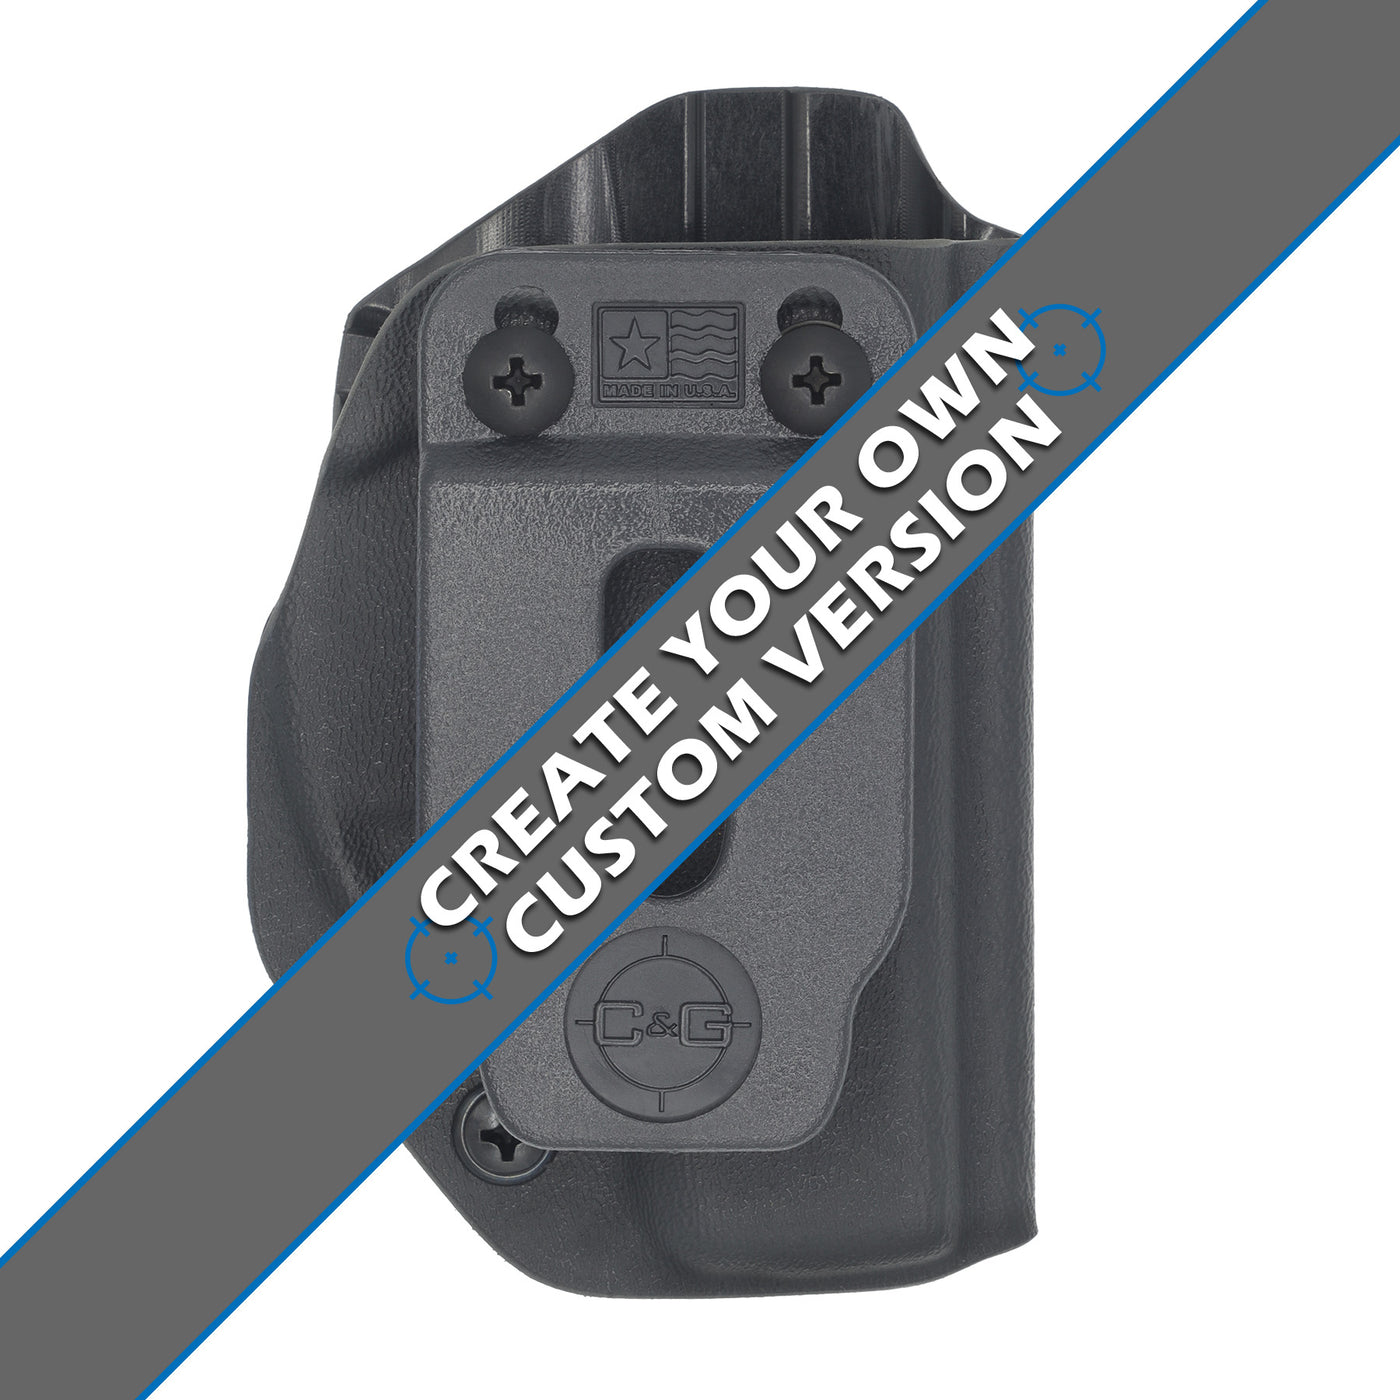 The C&G Holsters custom Covert IWB kydex holster for Ruger LCP.